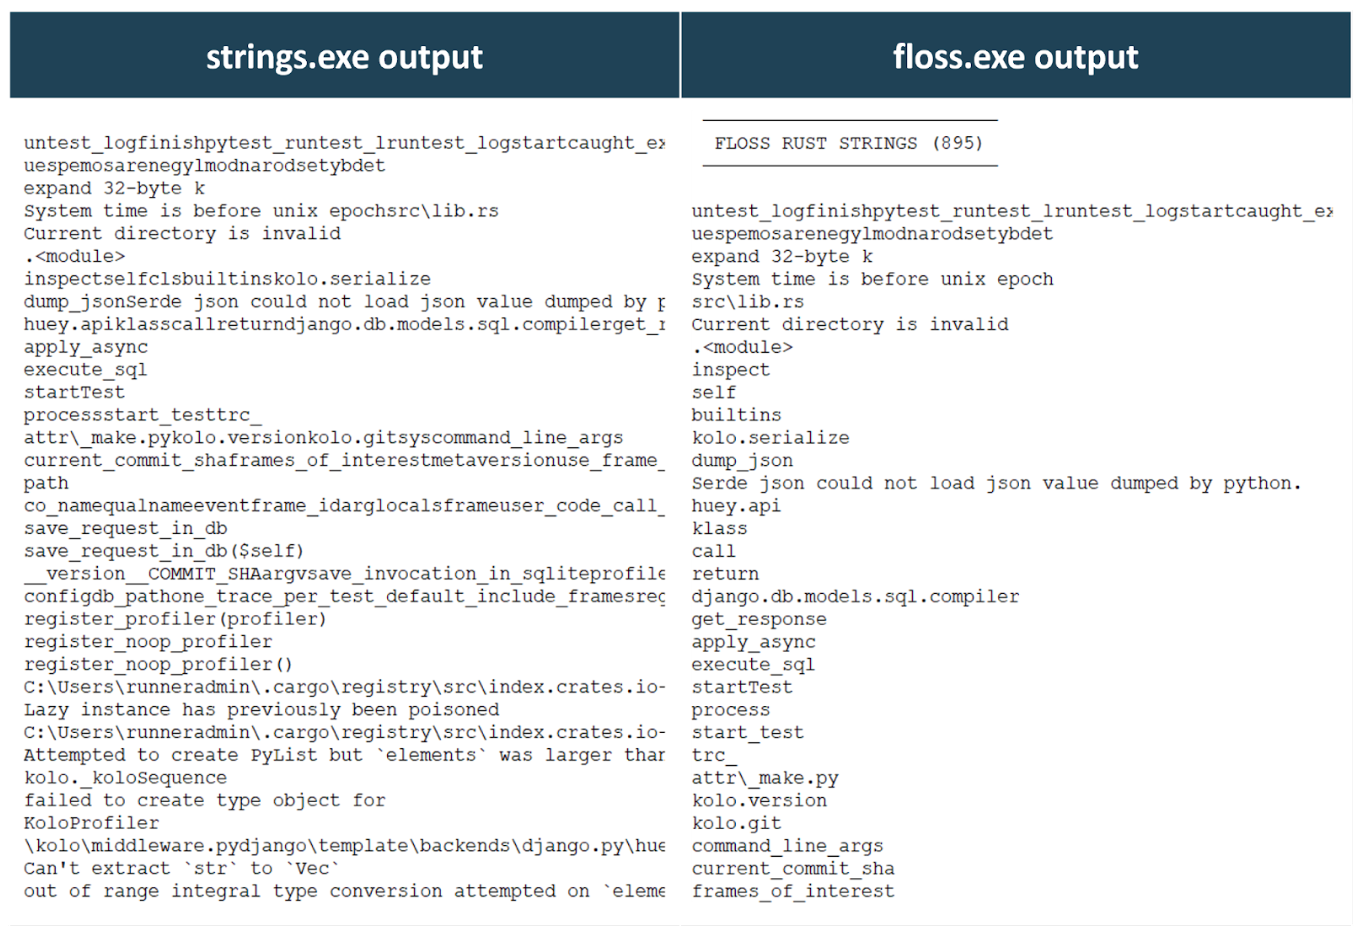 Example comparison of strings.exe and FLOSS output